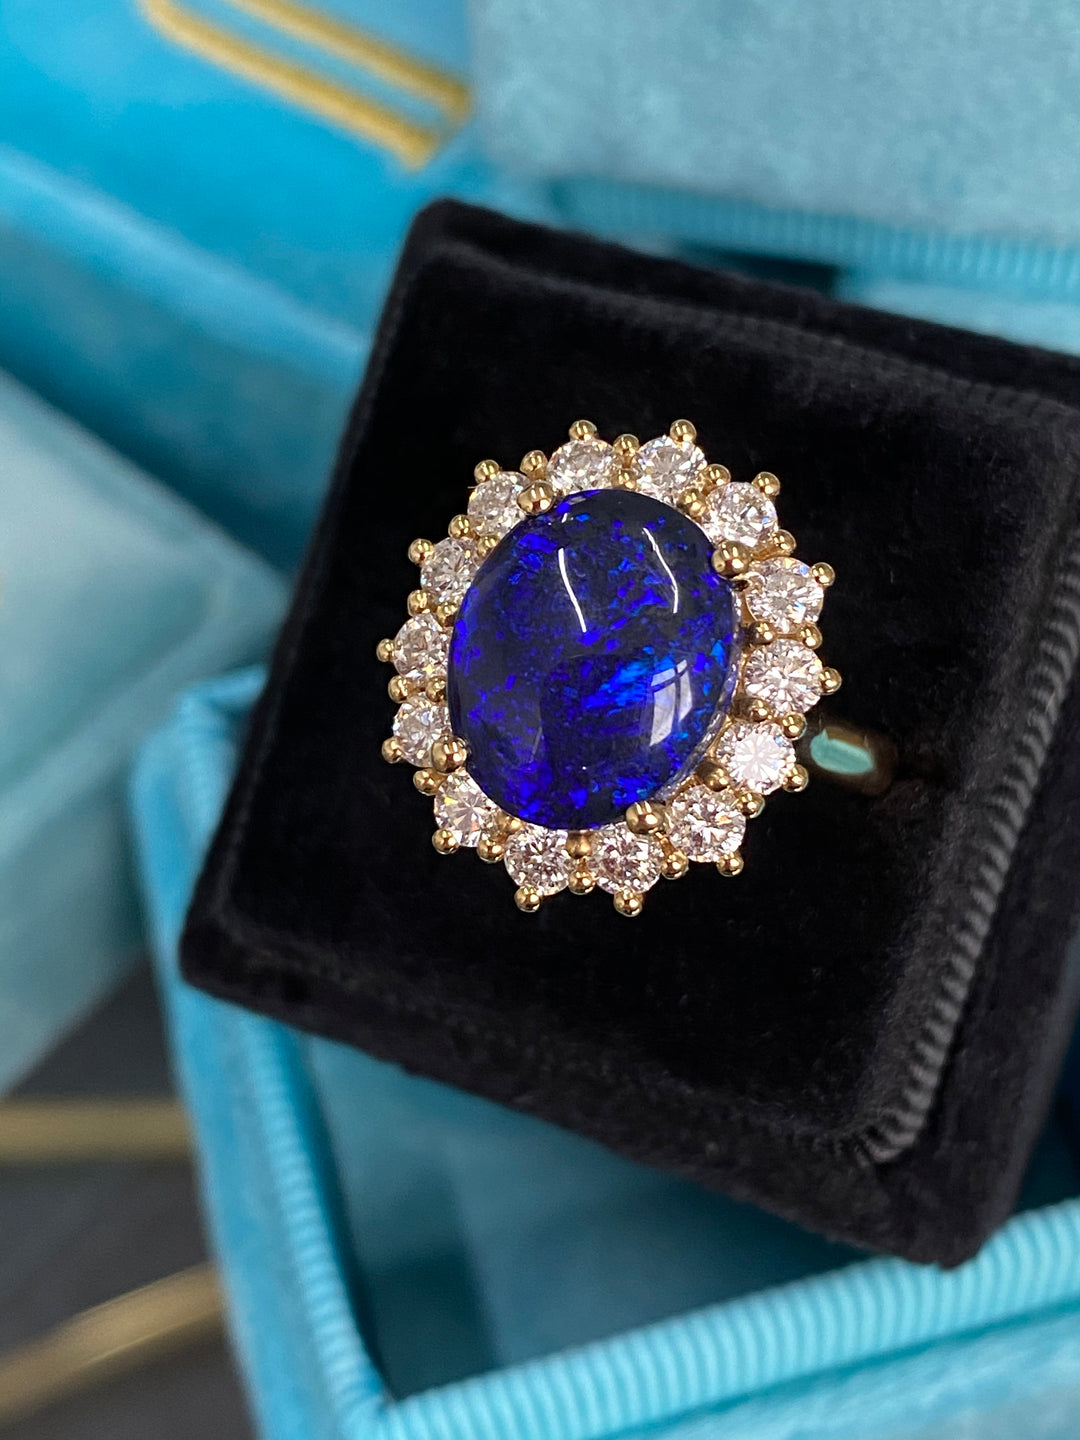 3.57 Carat Vintage Black Opal and Diamond Halo Ring in 18ct Yellow Gold